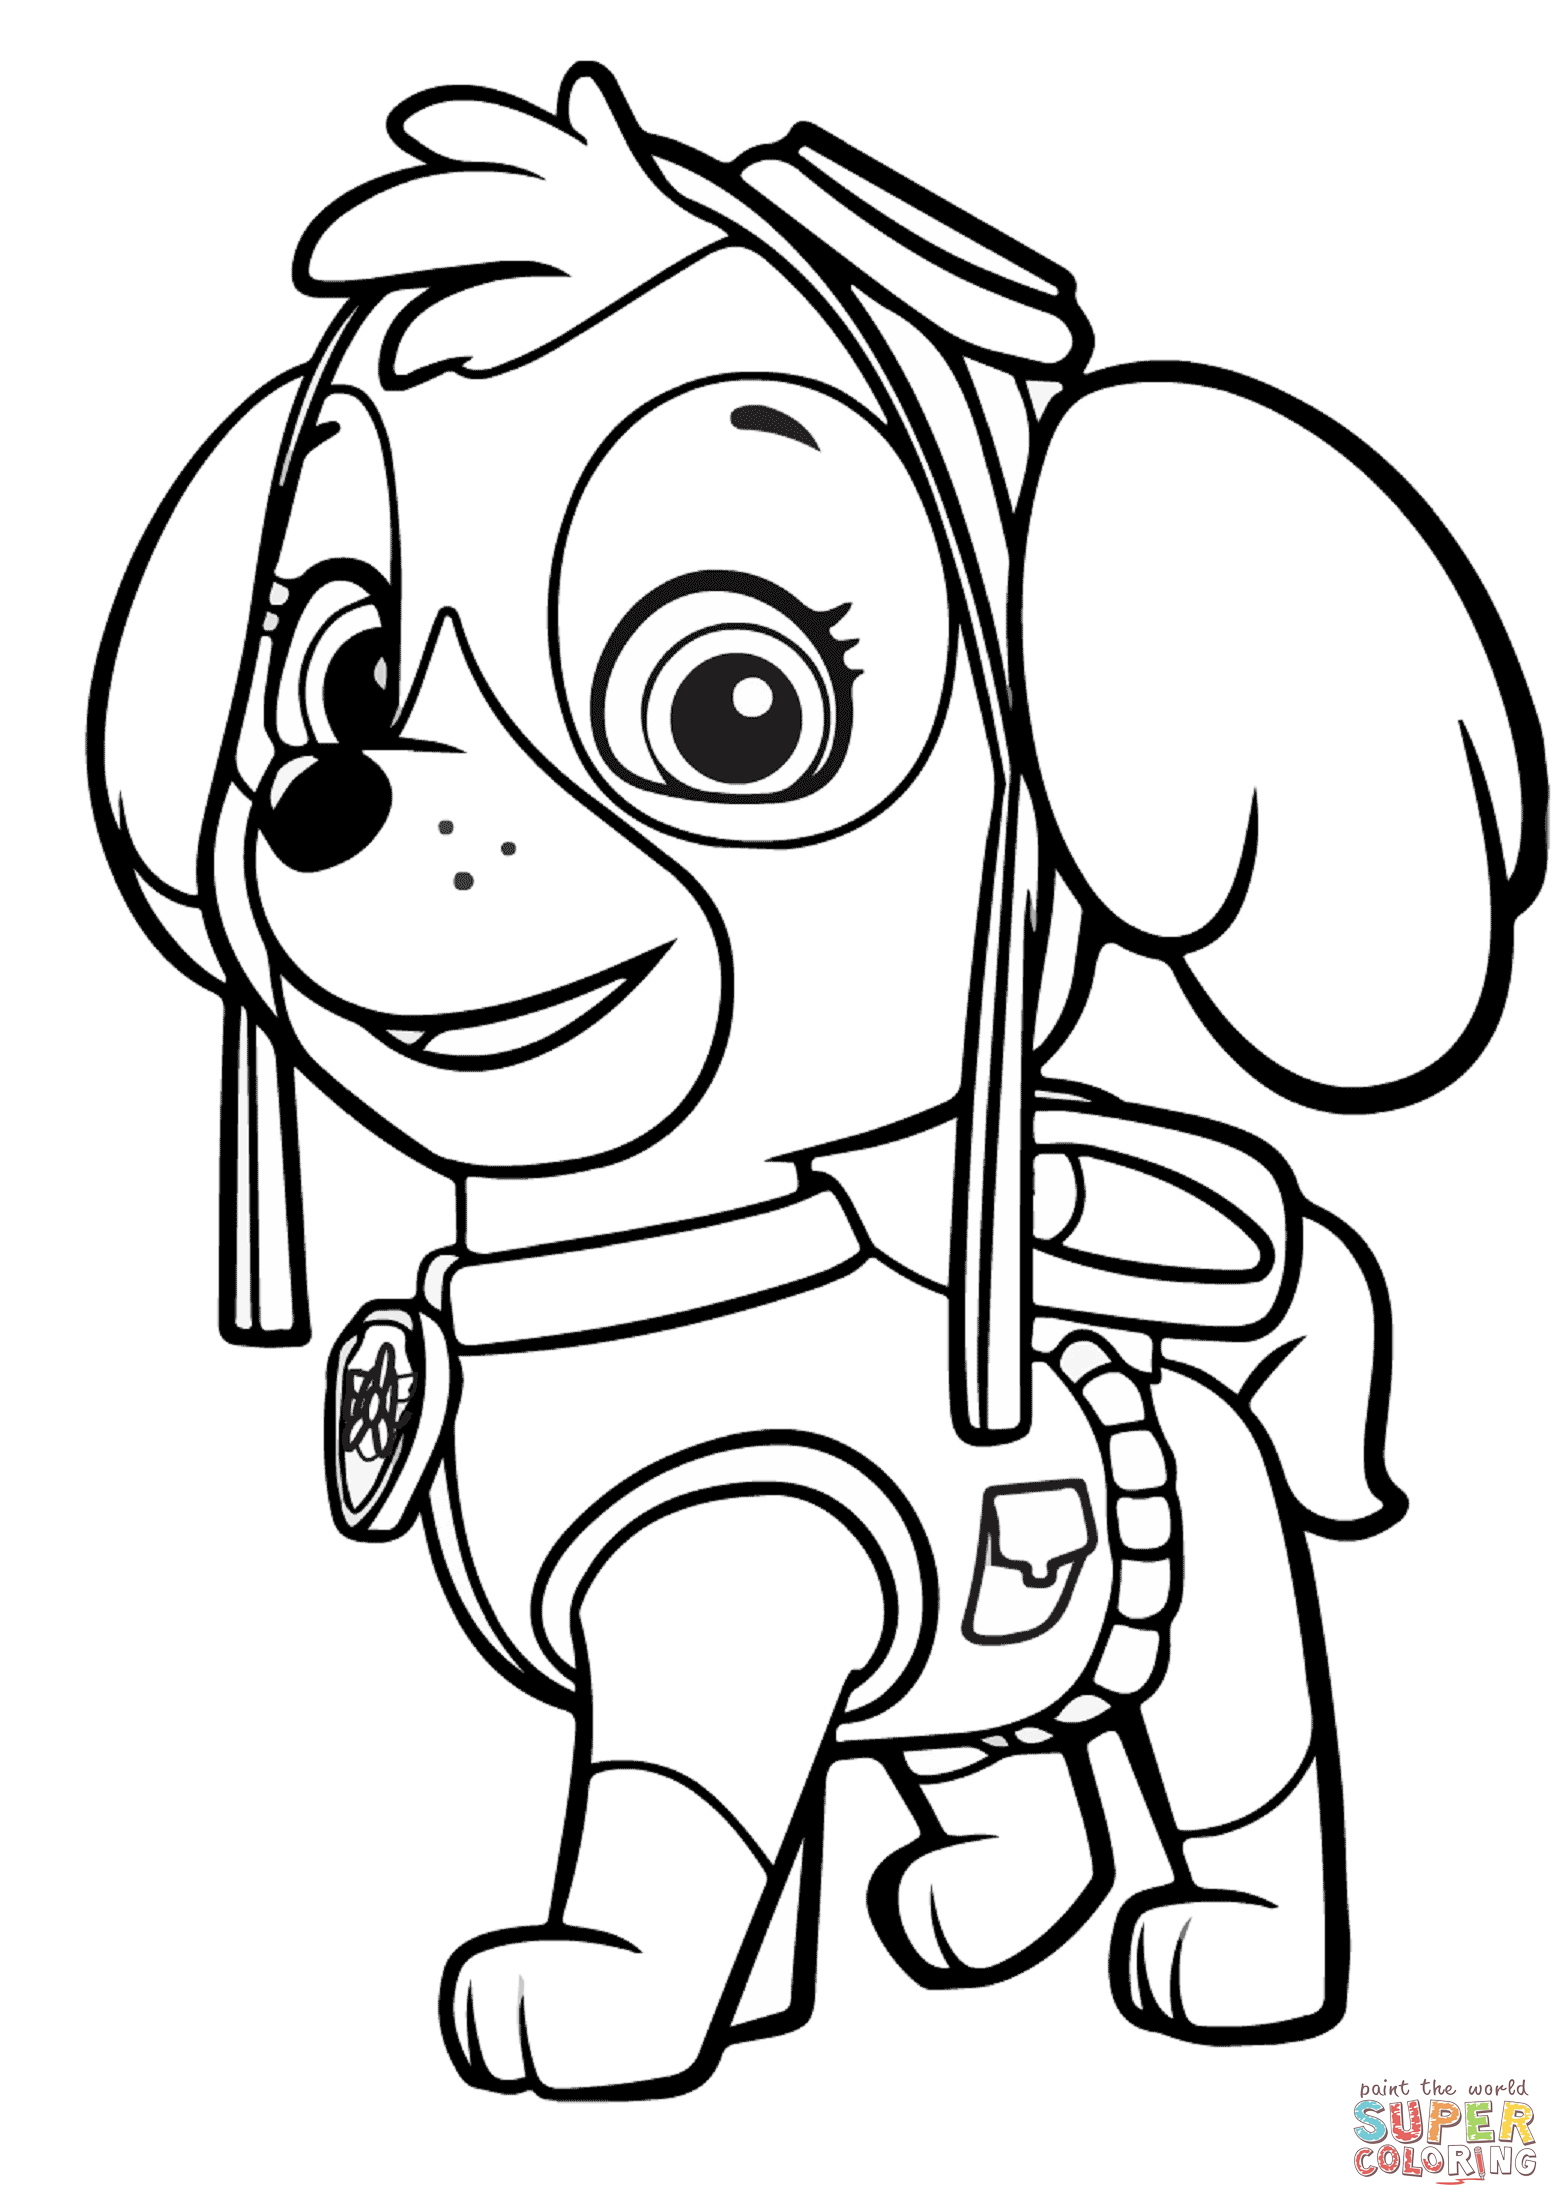 Coloring Pages Pdf | Free download on ClipArtMag